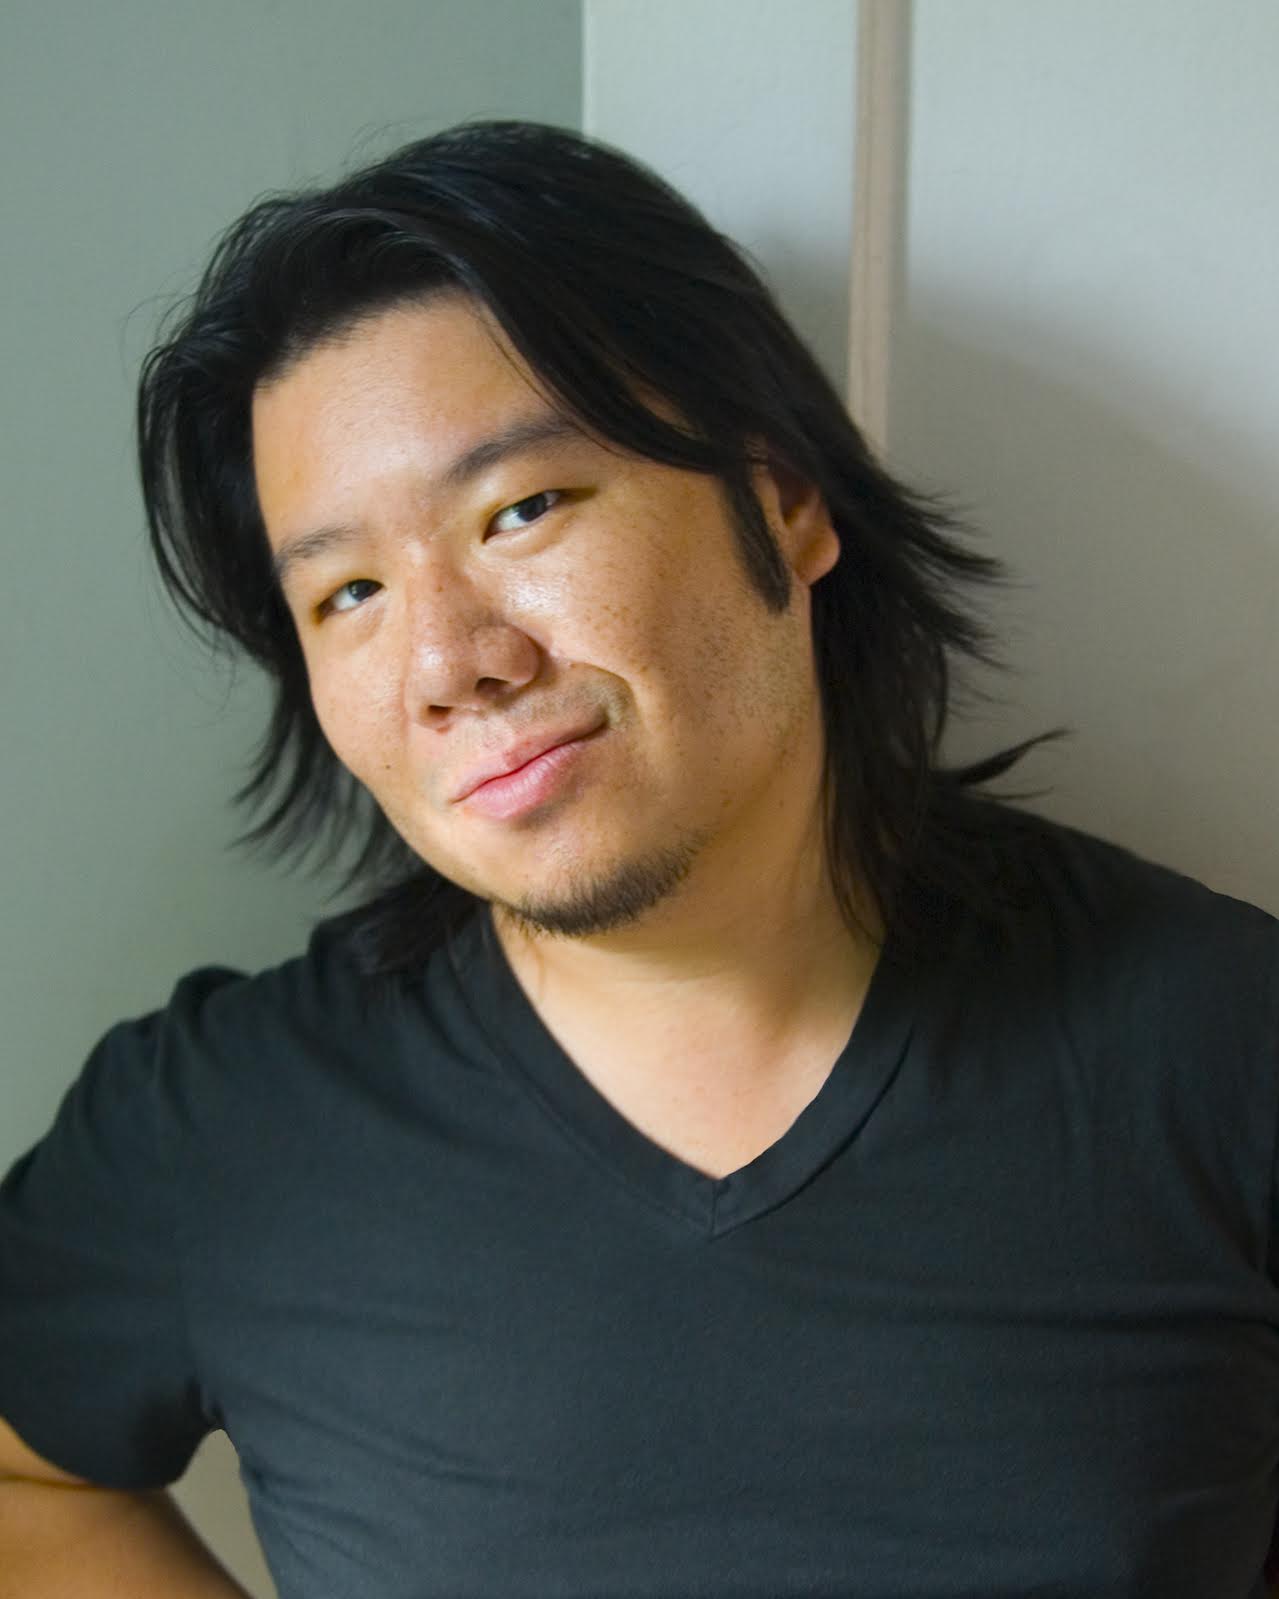 Kevin Kwan on the Philippines,  Crazy Rich Asians & Asian representation